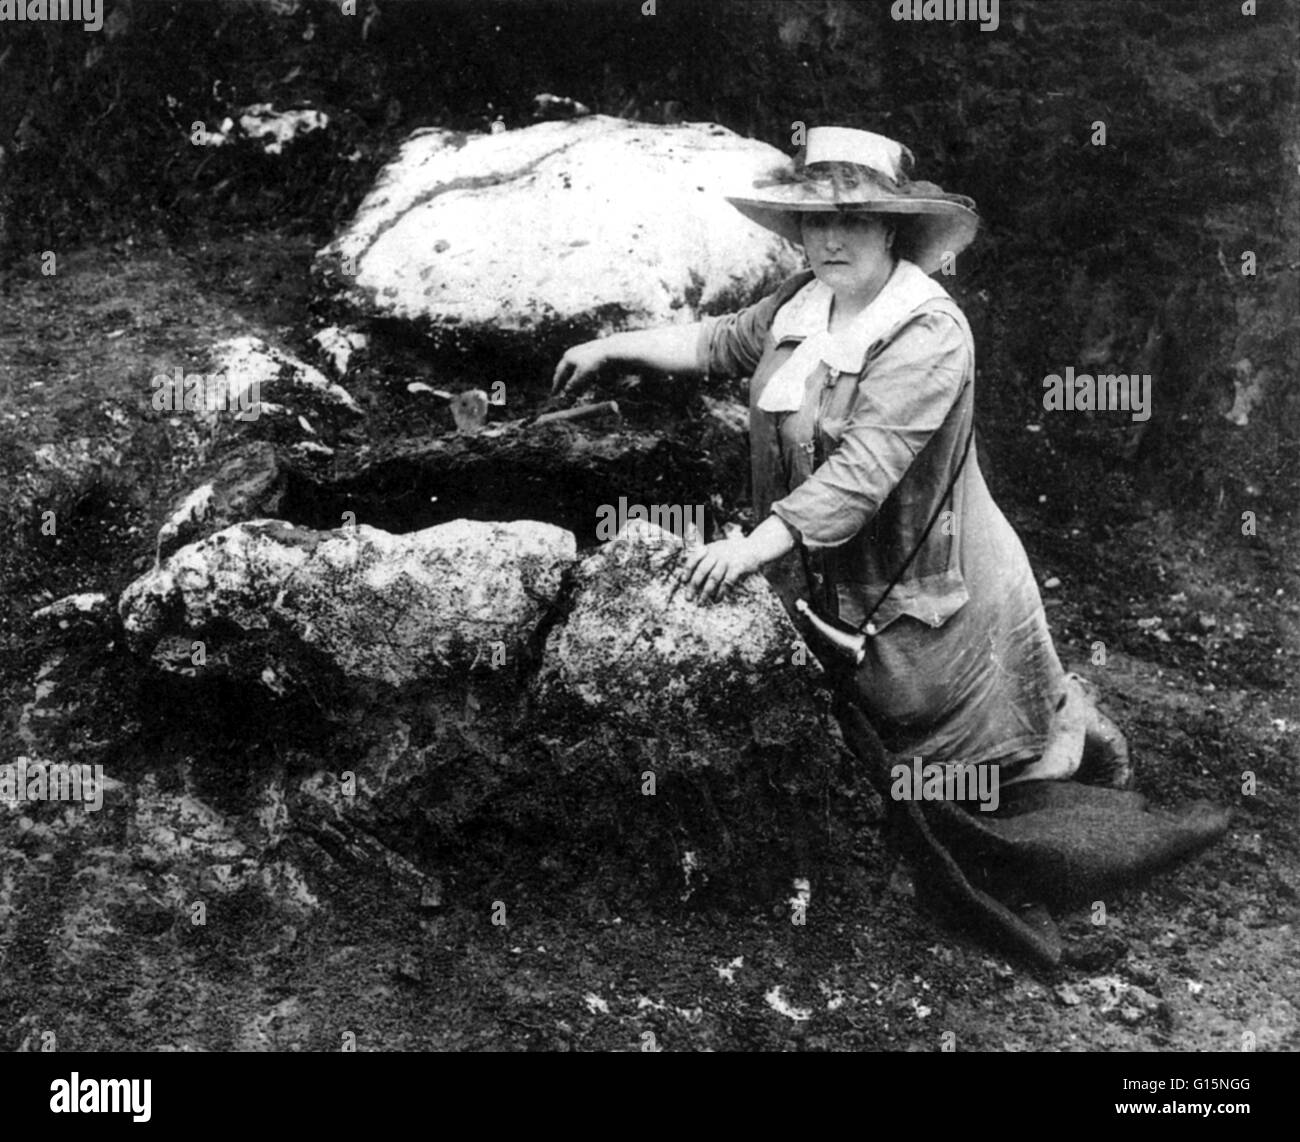 Undated photograph of Duchess Marie at unidentified dig site. Princess Marie of Windisch-Graetz (1856-1929) was a daughter of Hugo, Prince of Windisch-Gratz, and Princess Louise of Mecklenburg-Schwerin. In 1881, she married her first cousin, the German-bo Stock Photo